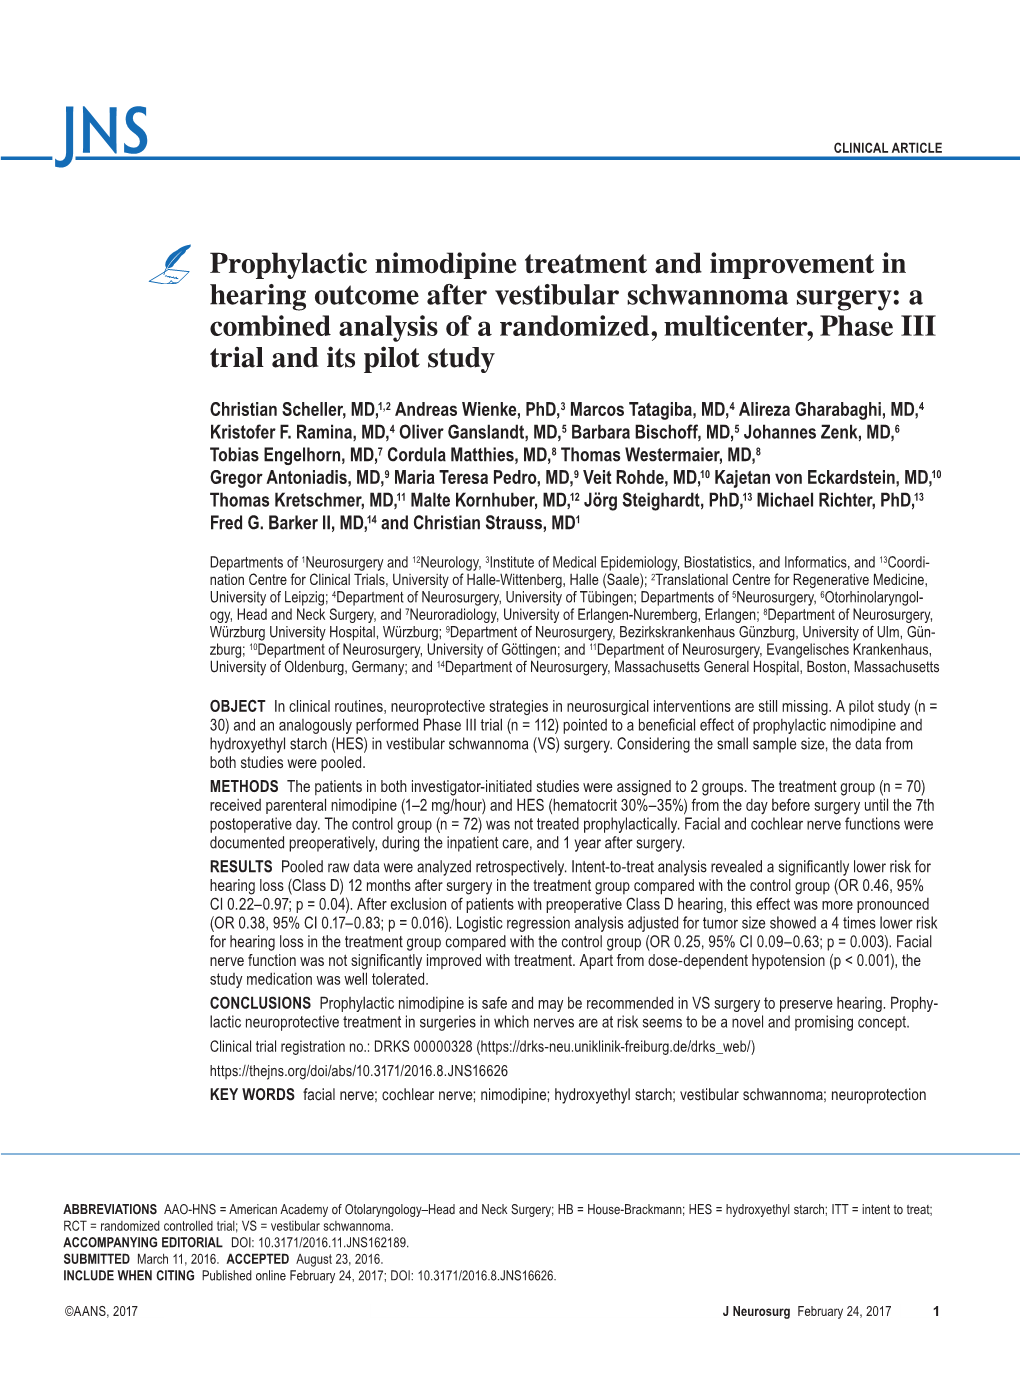 A Combined Analysis of a Randomized, Multicenter, Phase III Trial and Its Pilot Study